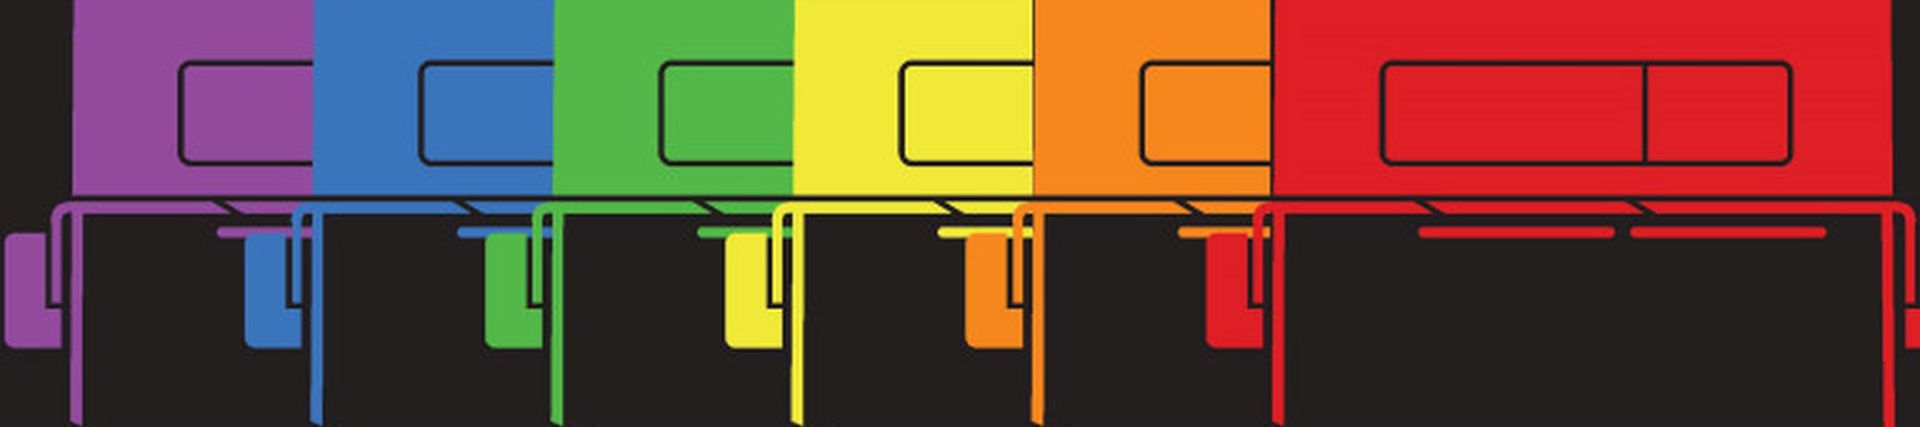 Poster depicting 6 double decker buses in the colours of the LGBT rainbow flag